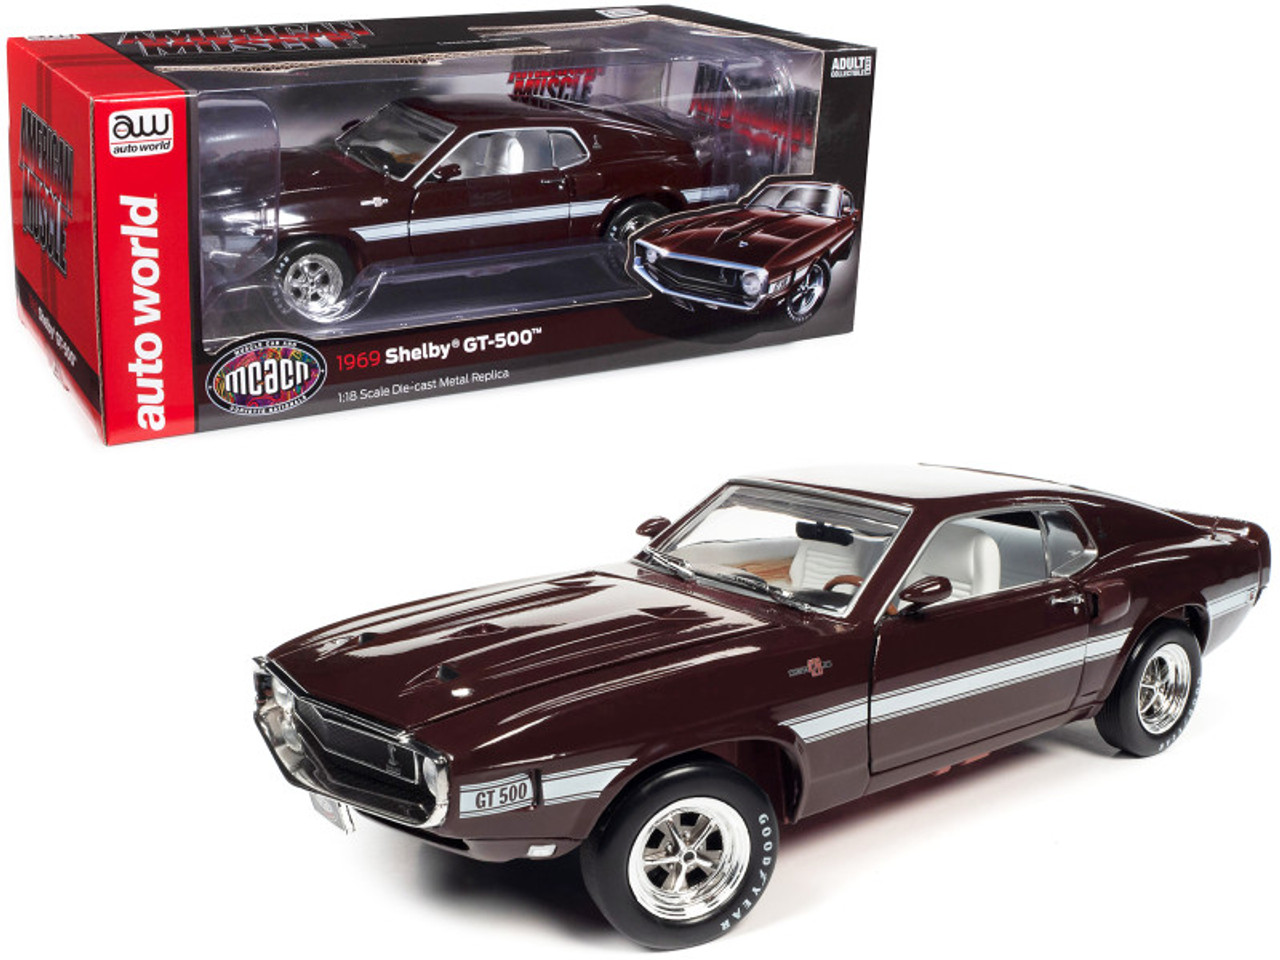 1969 Ford Shelby Mustang GT-500 Royal Maroon with White Stripes and Interior "Muscle Car & Corvette Nationals" (MCACN) 1/18 Diecast Model Car by Auto World